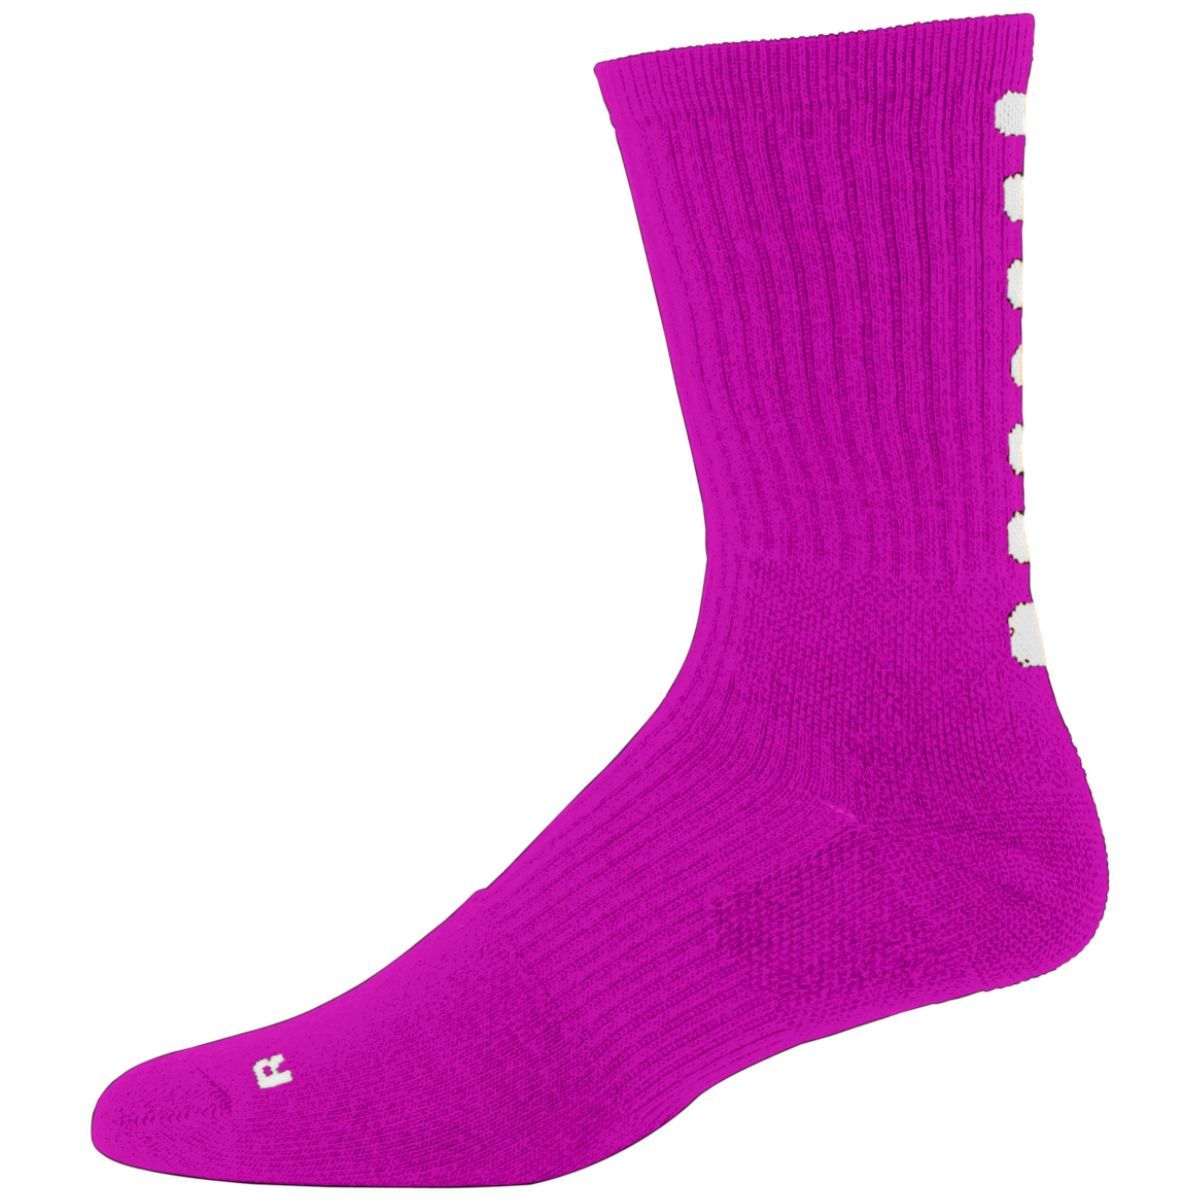 Augusta Sportswear Color Block Crew Sock in Power Pink/White  -Part of the Adult, Augusta-Products, Accessories-Socks product lines at KanaleyCreations.com